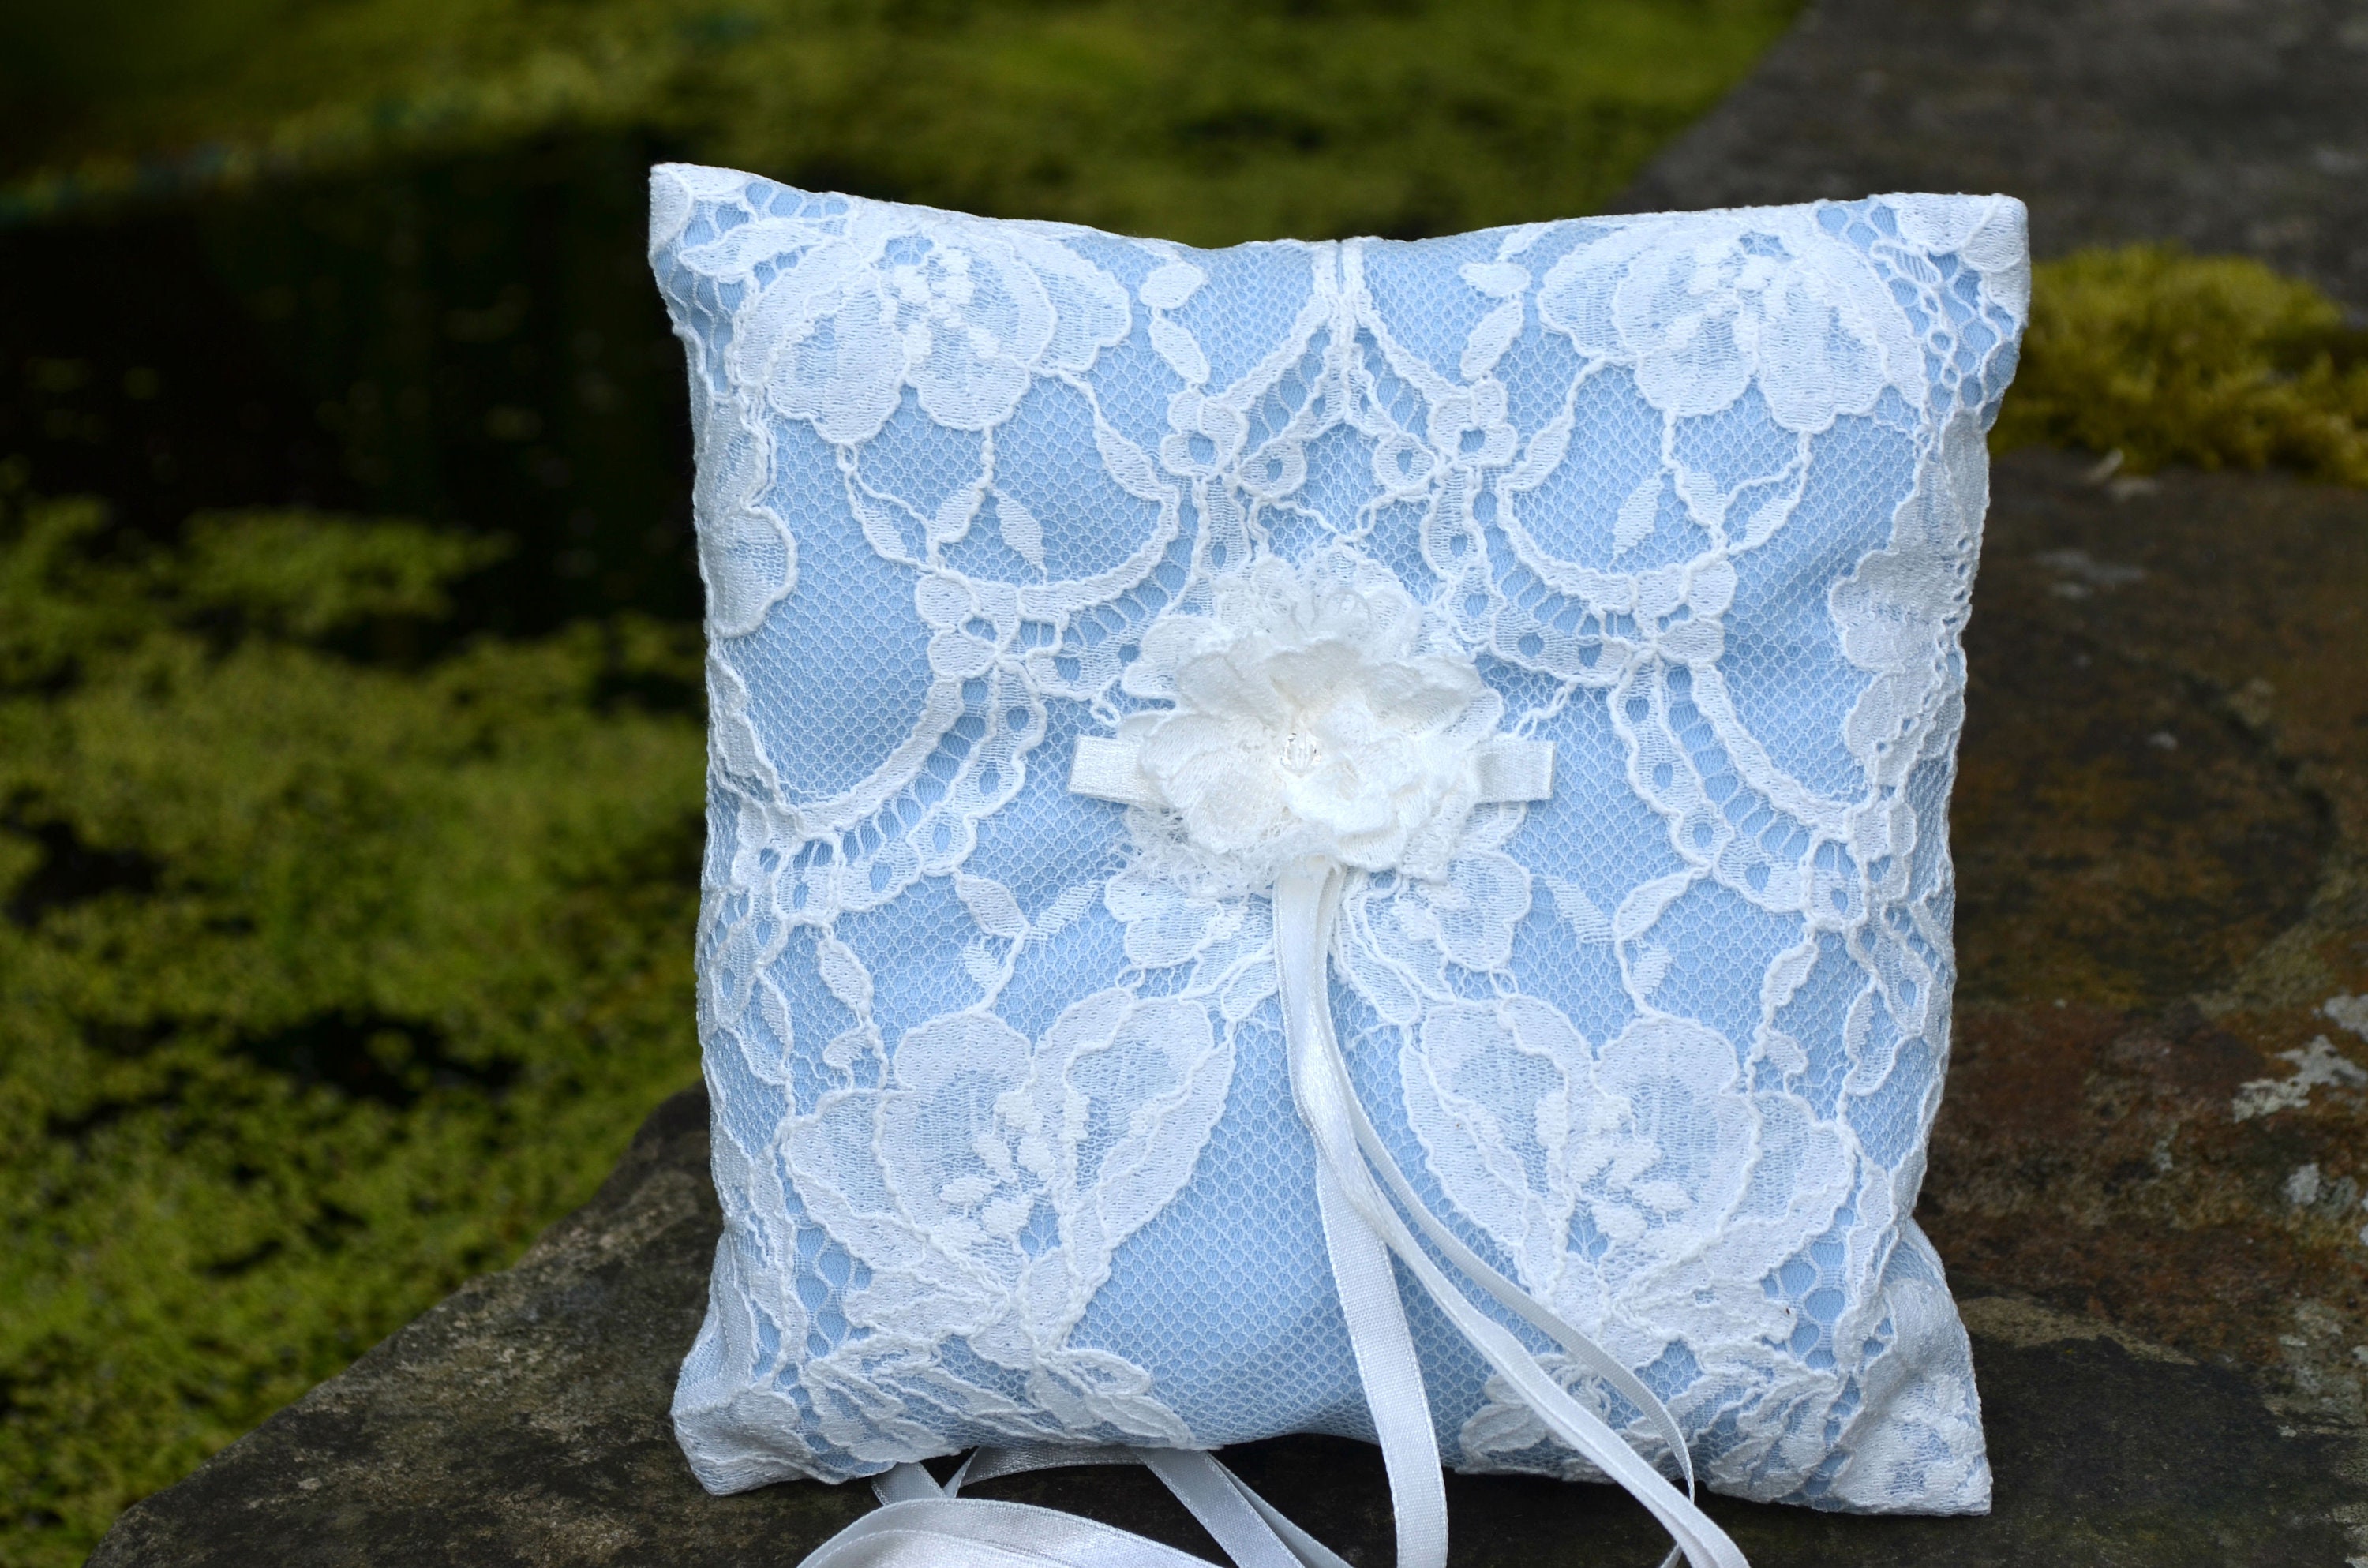 Ring Bearer Pillow Ideas You Can Make on Your Own